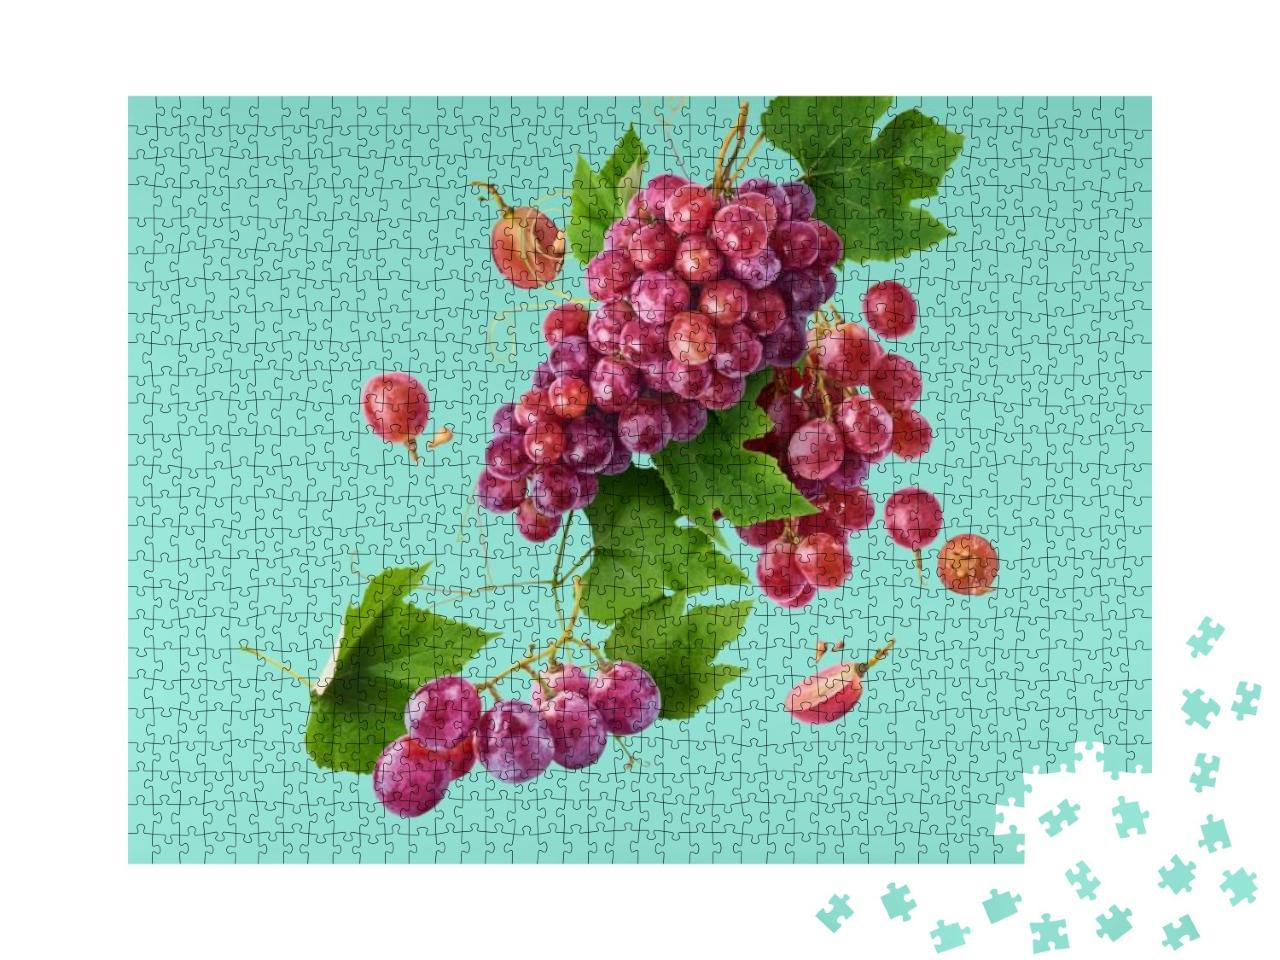 Fresh Ripe Grapes with Leaves Falling in the Air Isolated... Jigsaw Puzzle with 1000 pieces